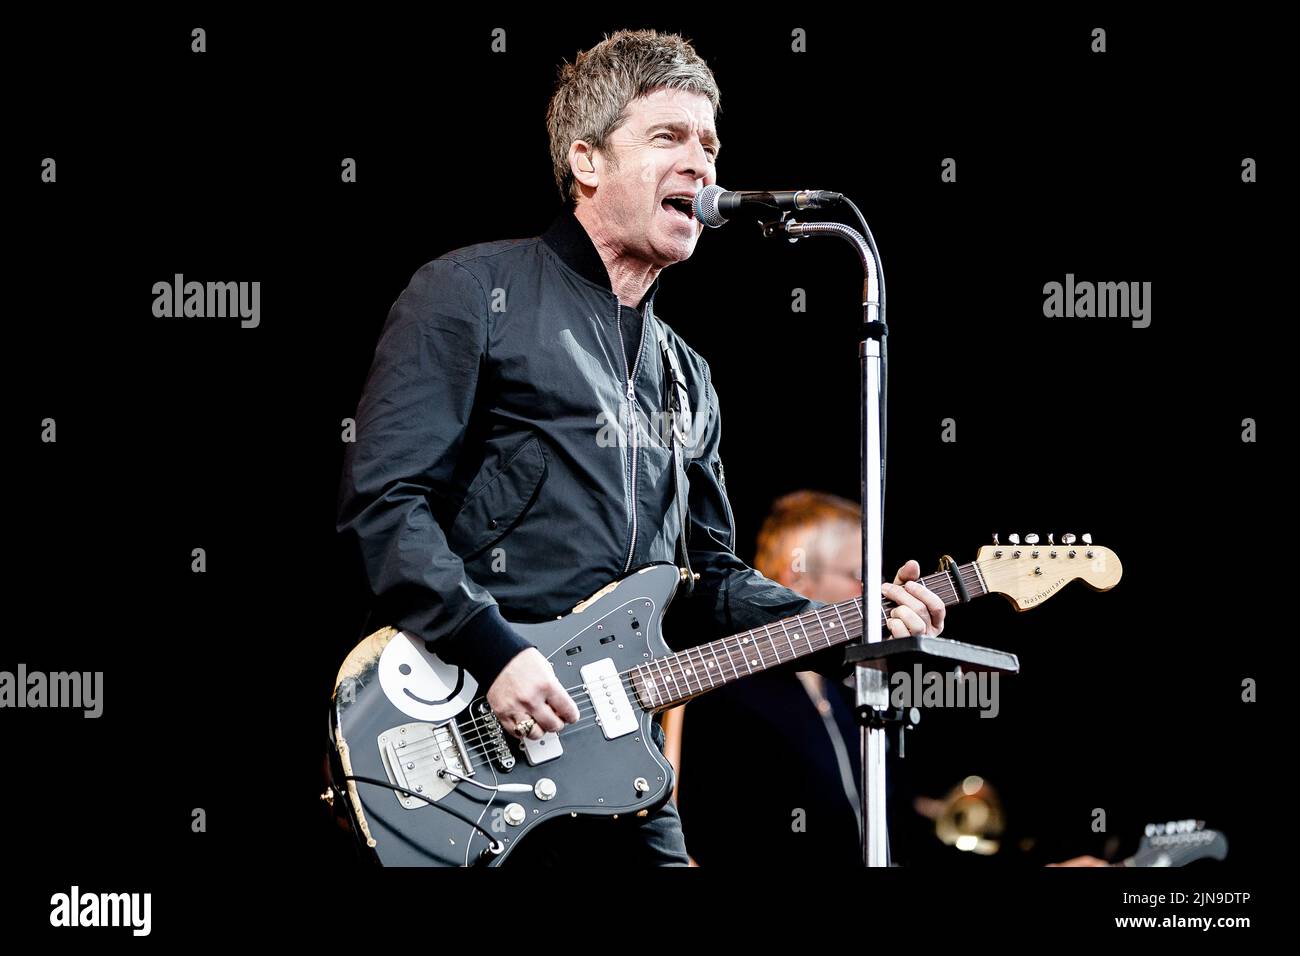 Noel Gallagher on stage during his performance at Eirias Stadium in Colwyn Bay, North Wales on 18th June 2022. Stock Photo